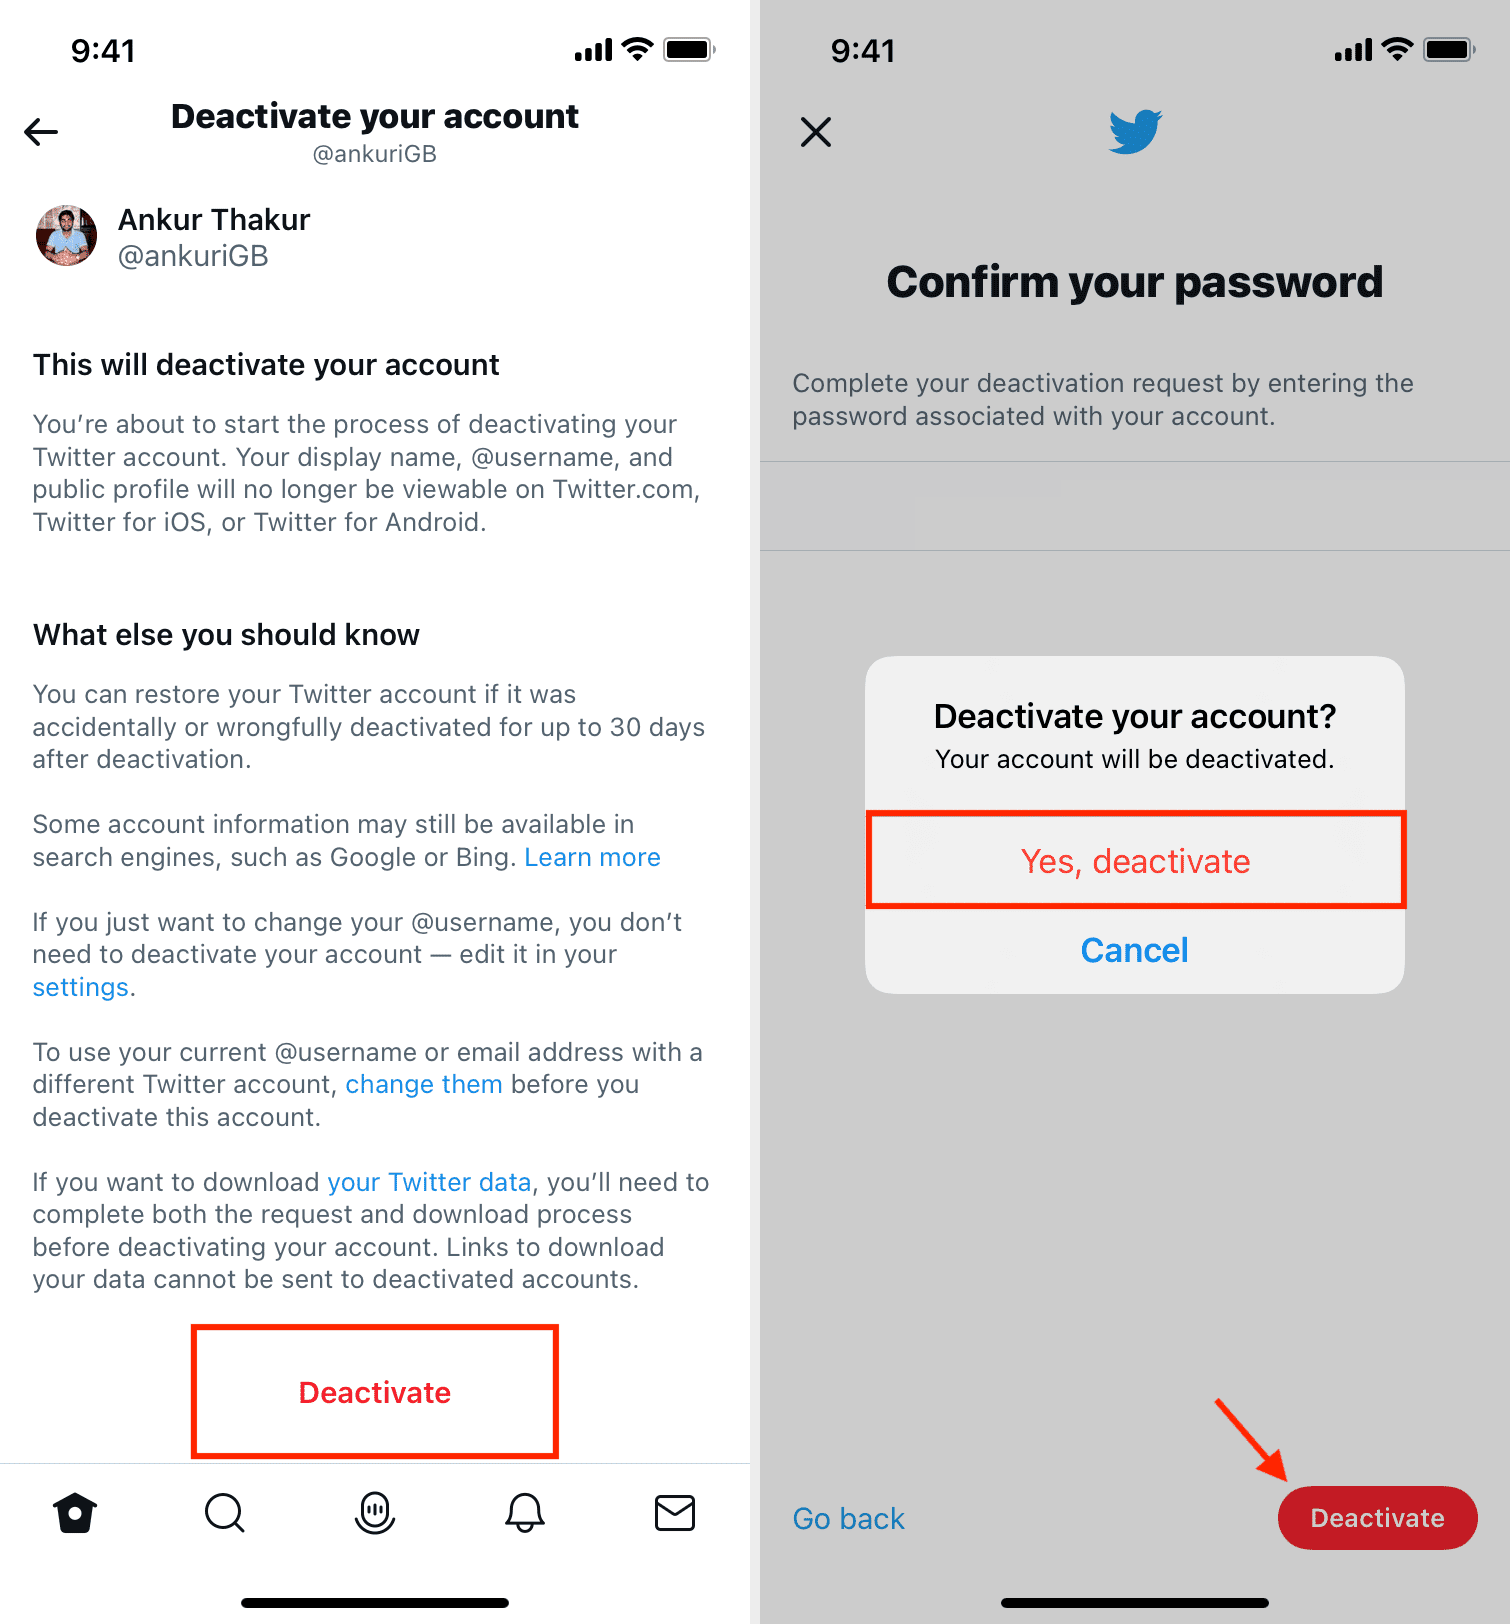 Confirm to deactivate your Twitter account